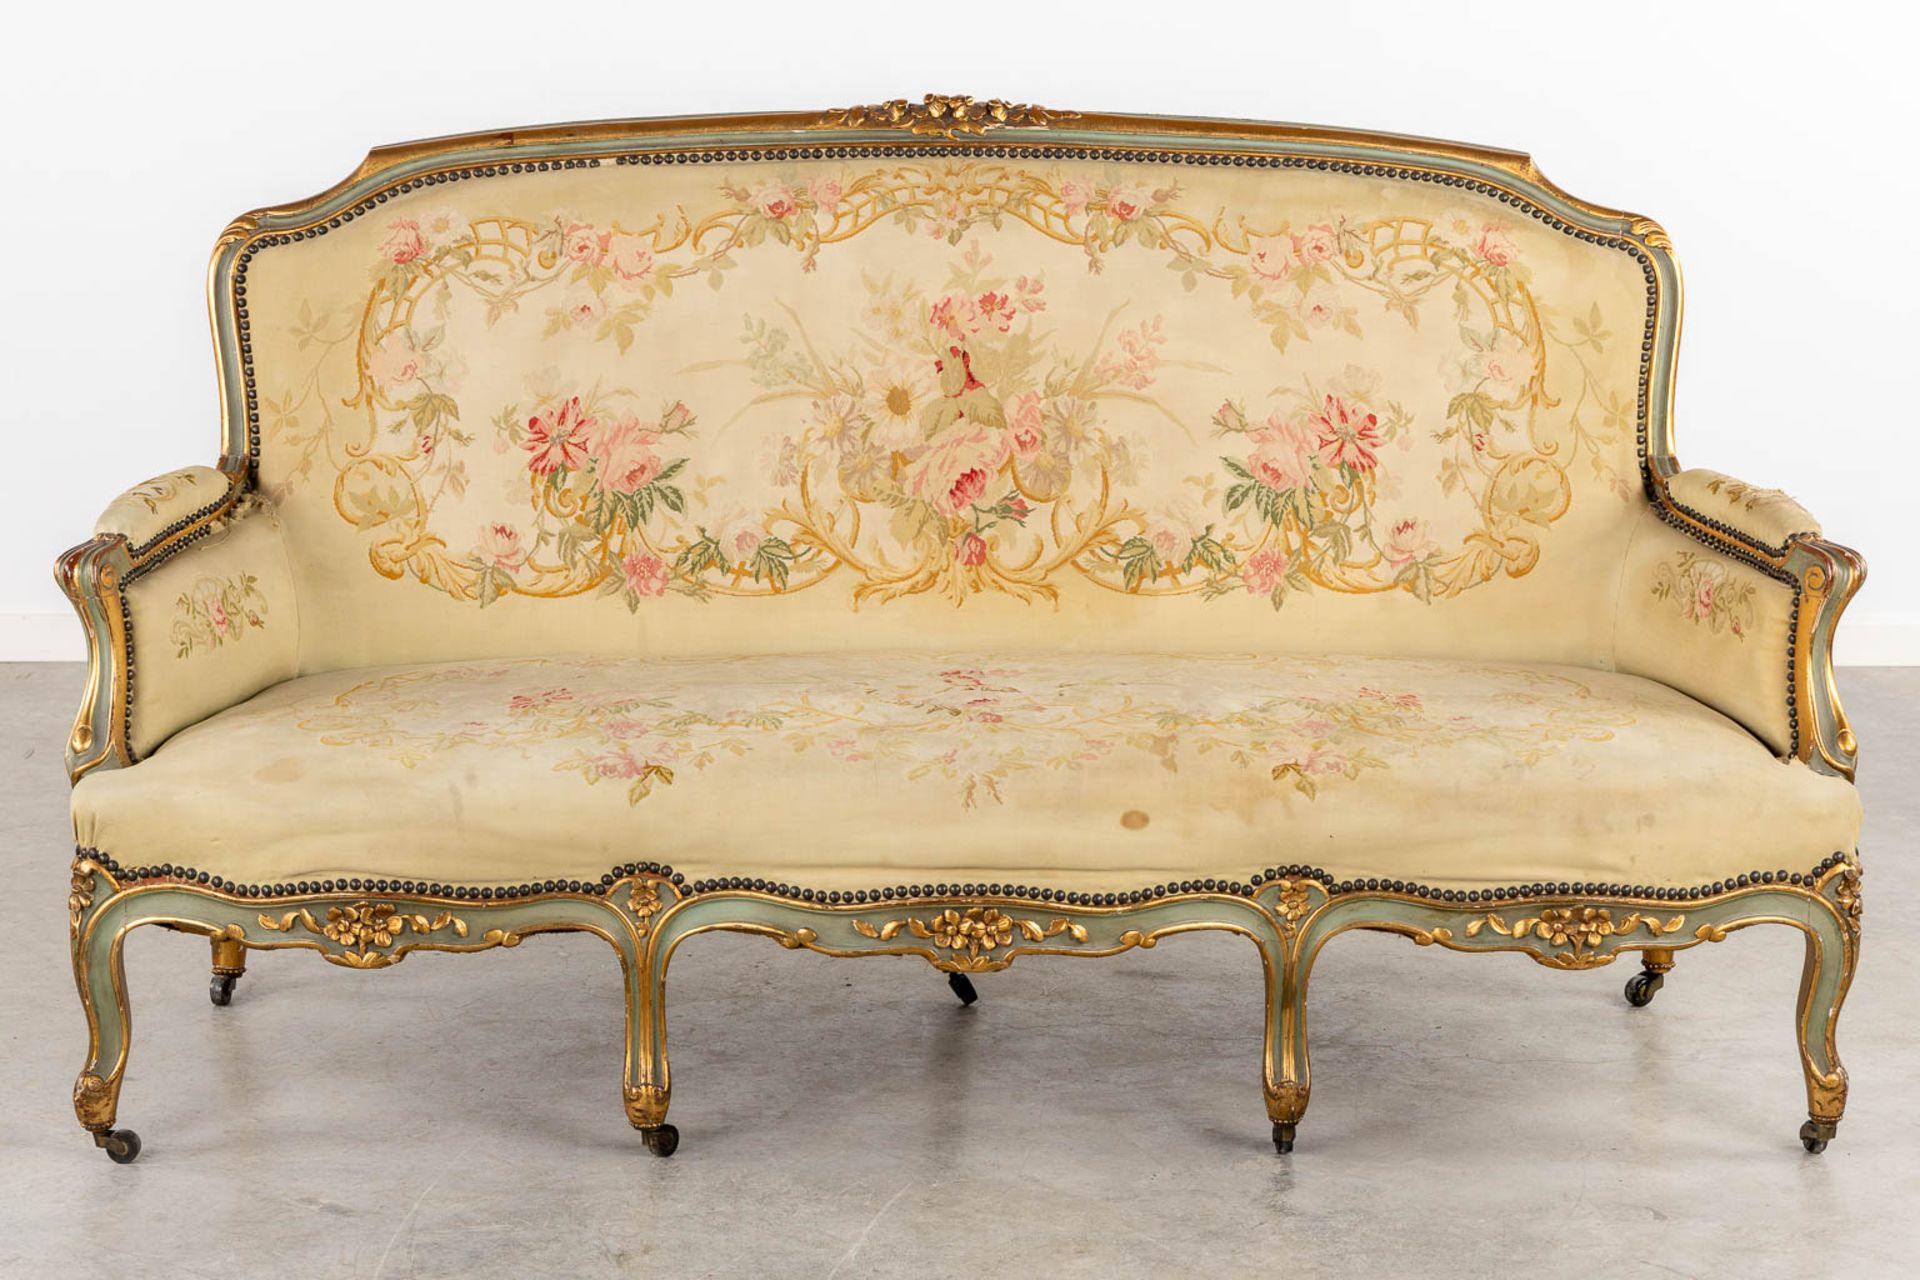 A Louis XV style sofa, upholstered with flower embroideries. (L:80 x W:175 x H:96 cm) - Bild 3 aus 11